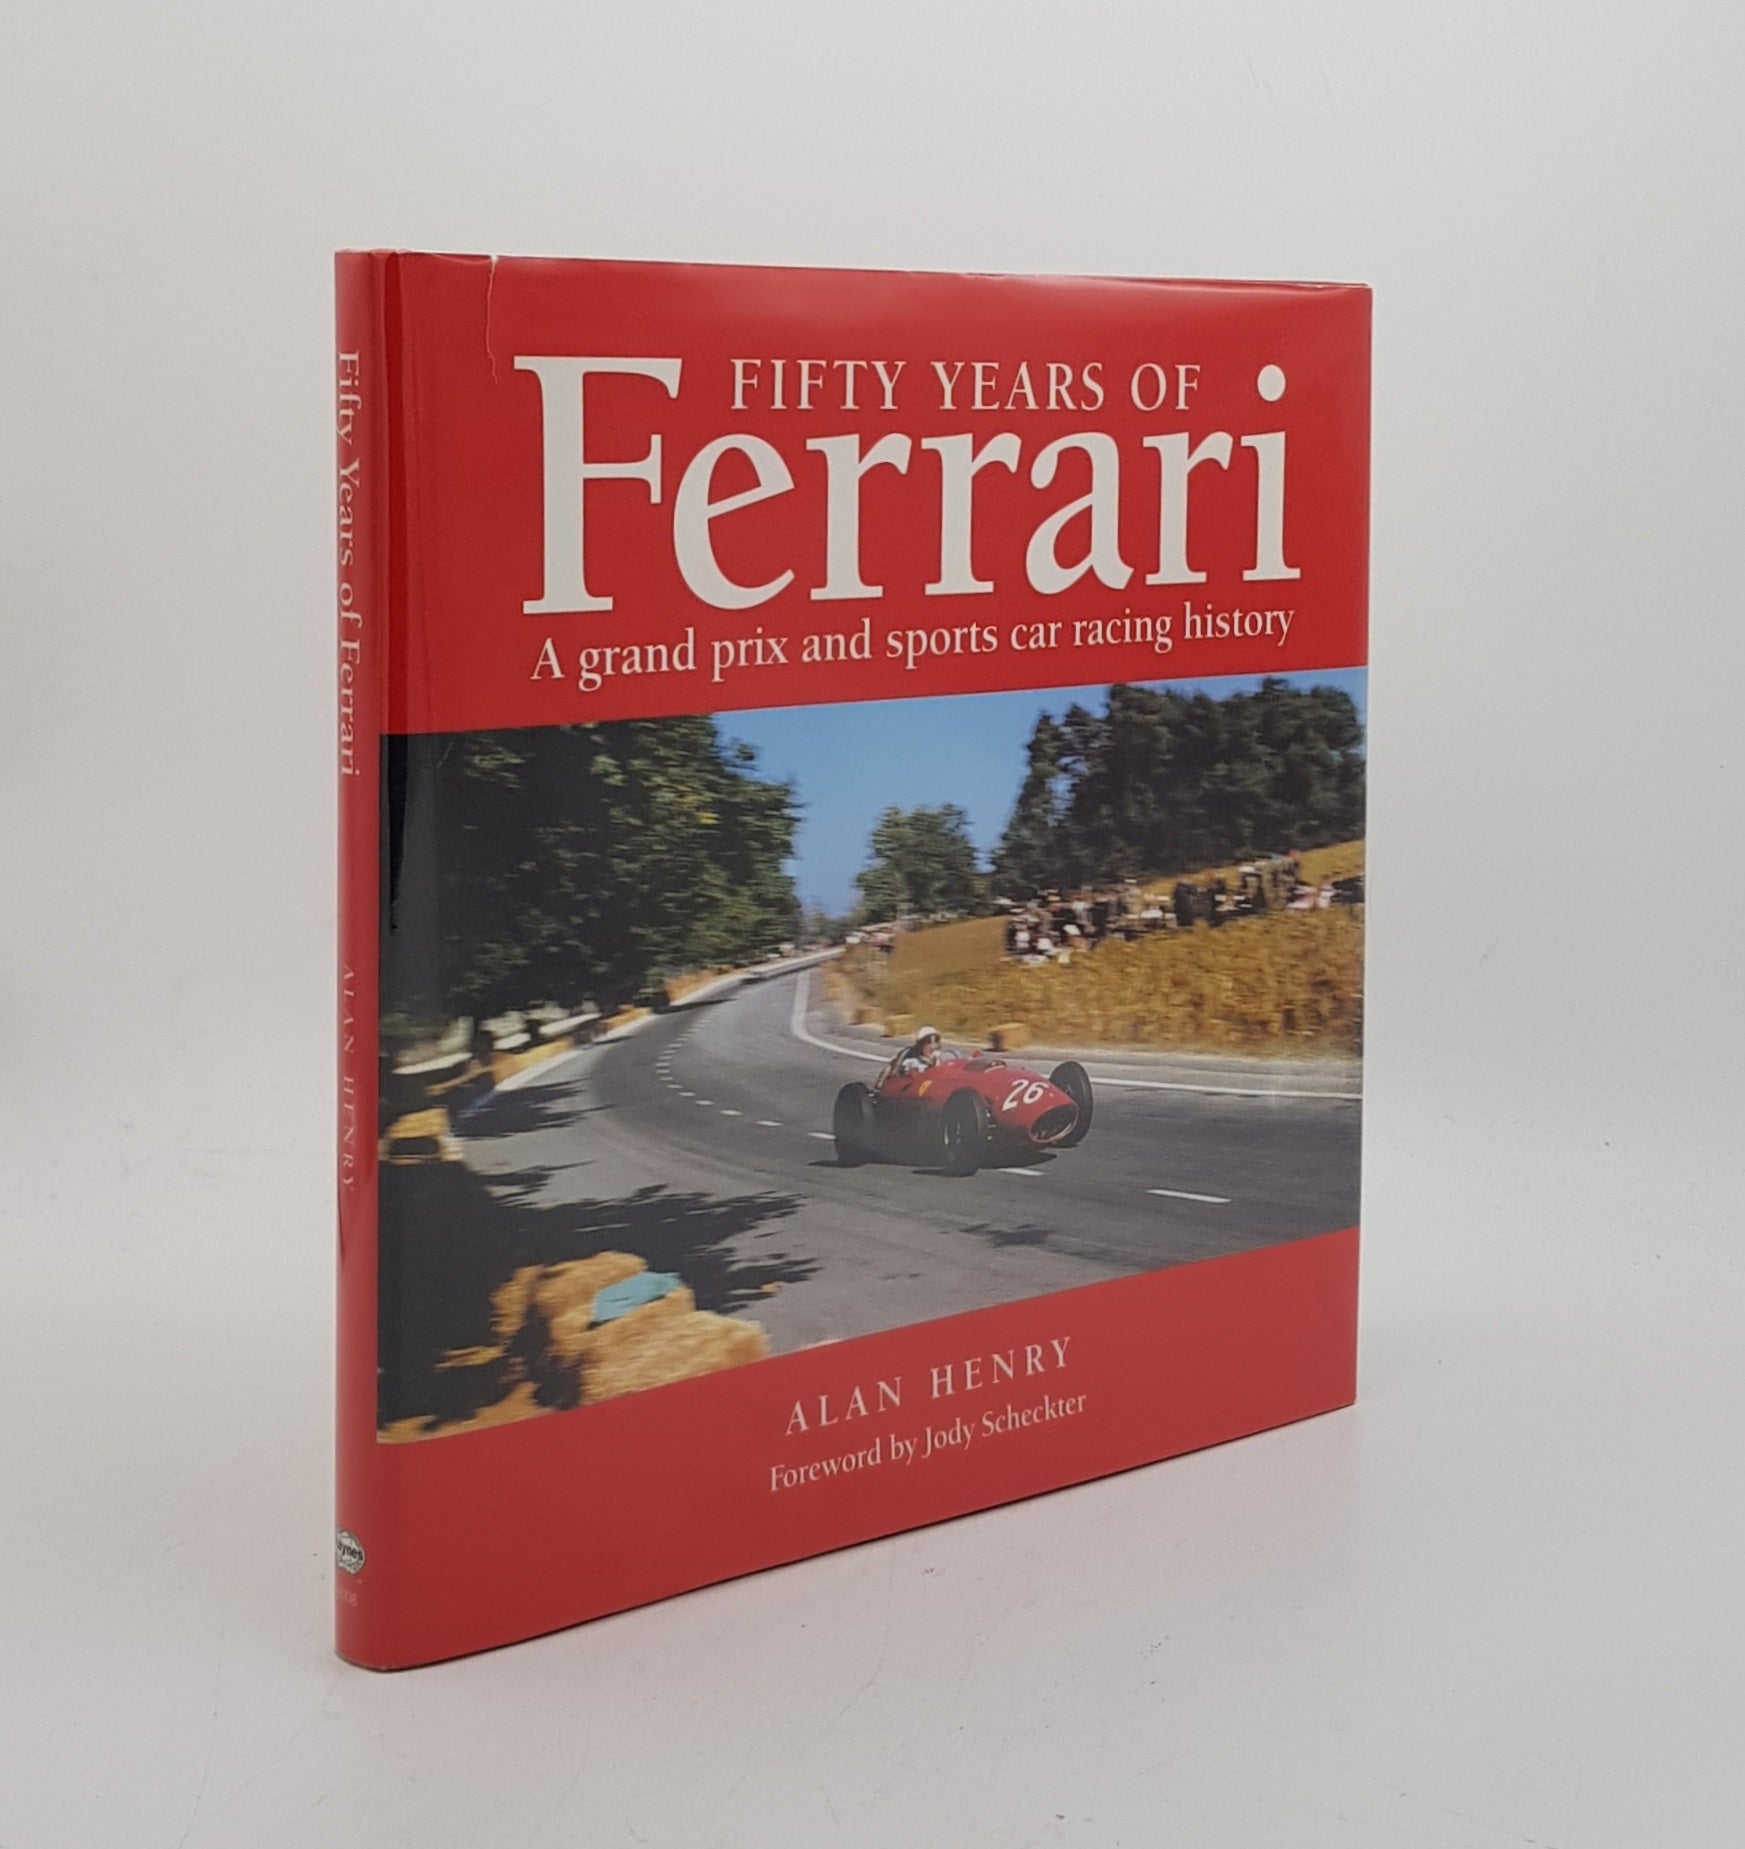 HENRY Alan - Fifty Years of Ferrari a Grand Prix and Sports Car Racing History